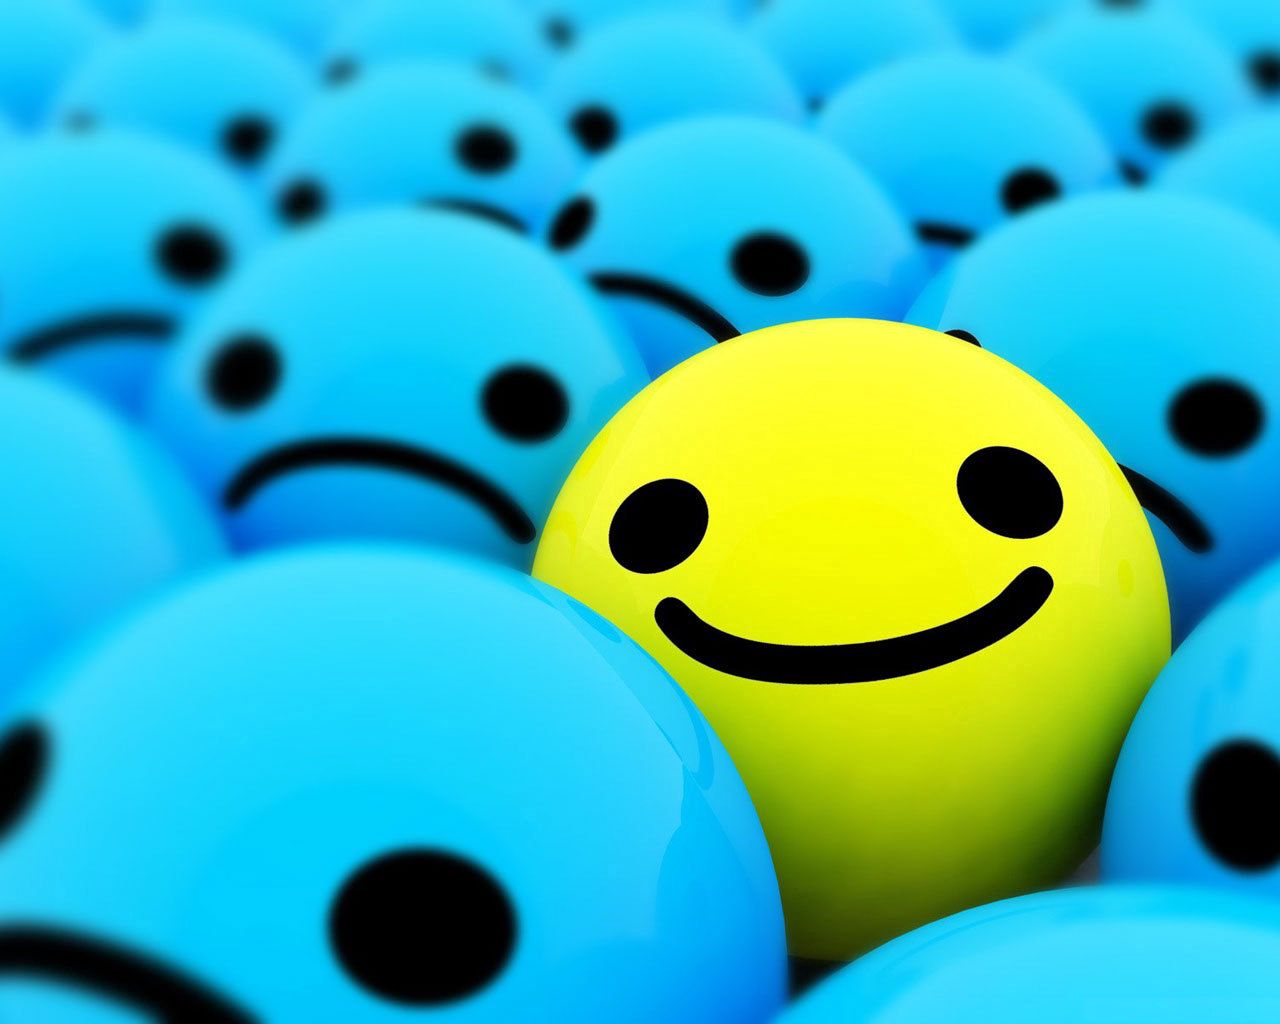 bright, yellow, smile, abstract, blue lock screen backgrounds